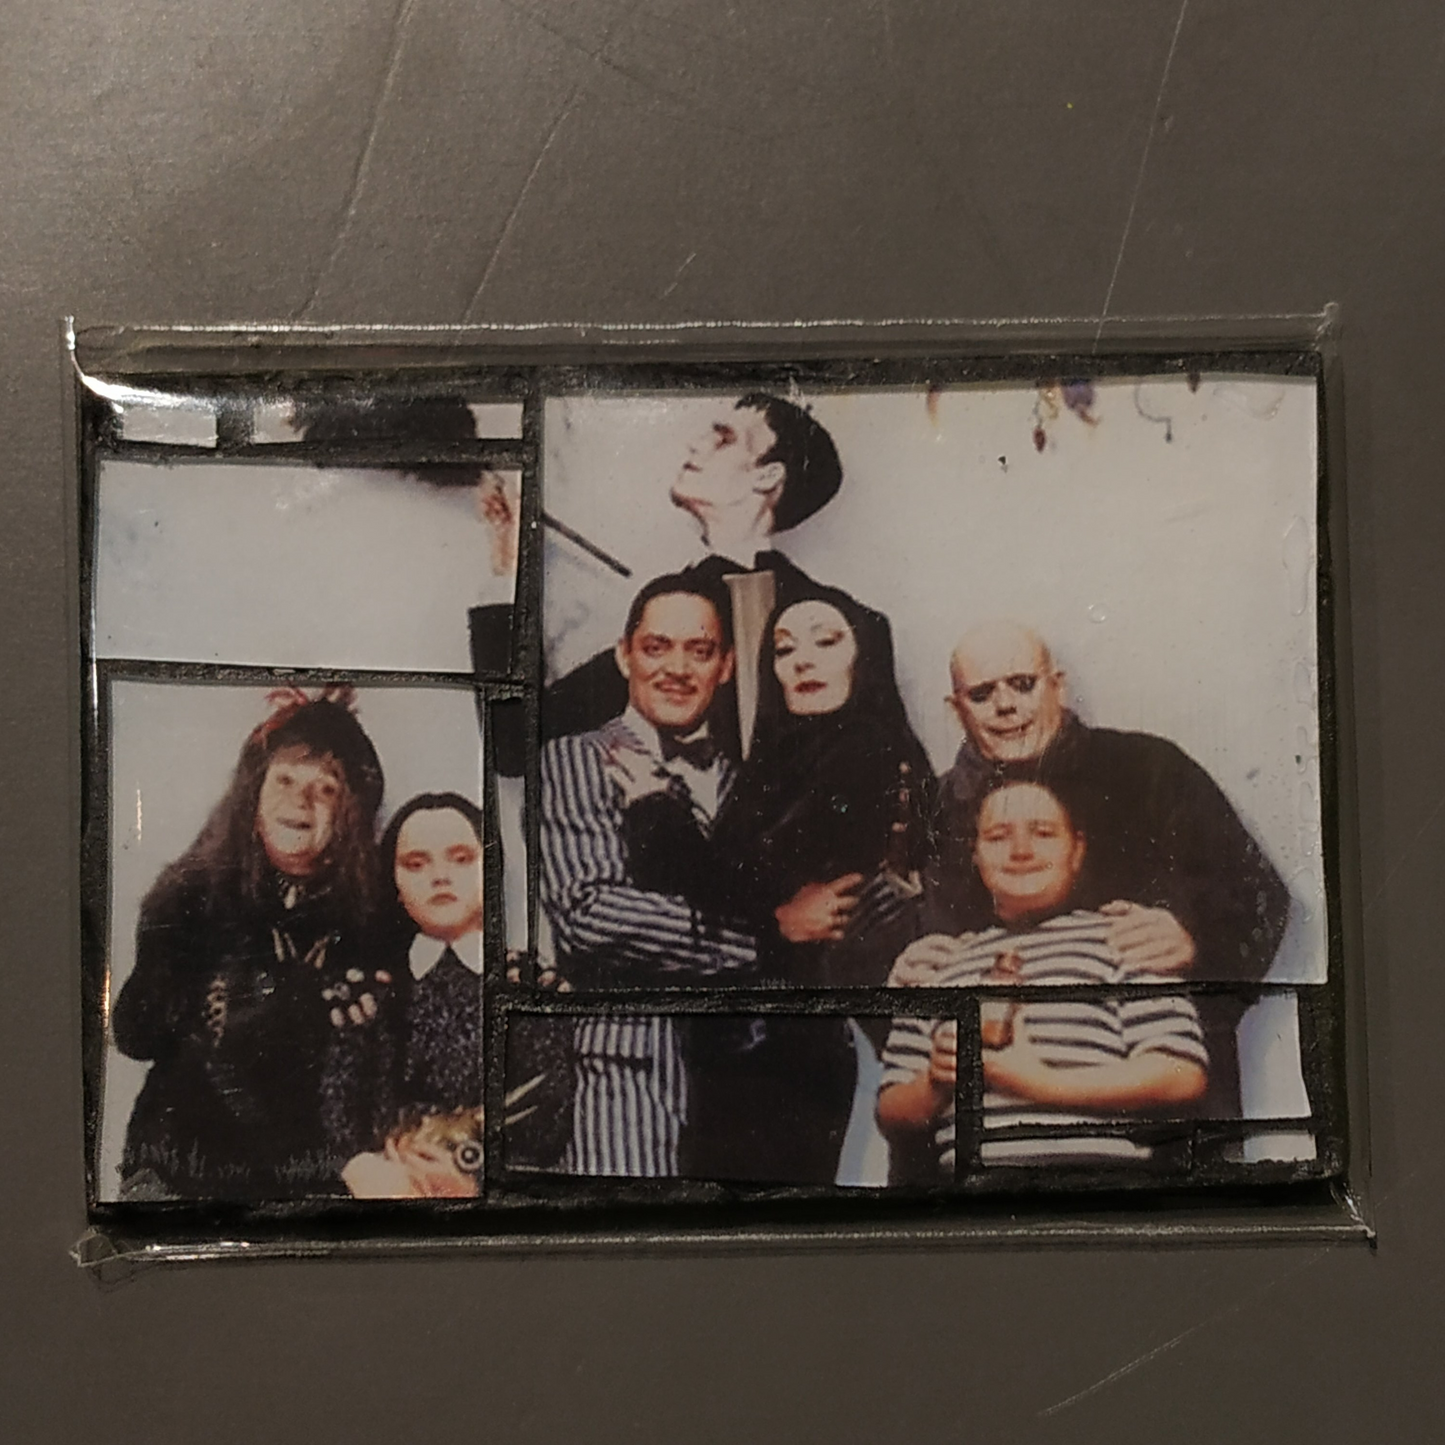 Glass mosaic magnet  "The Addams Family"